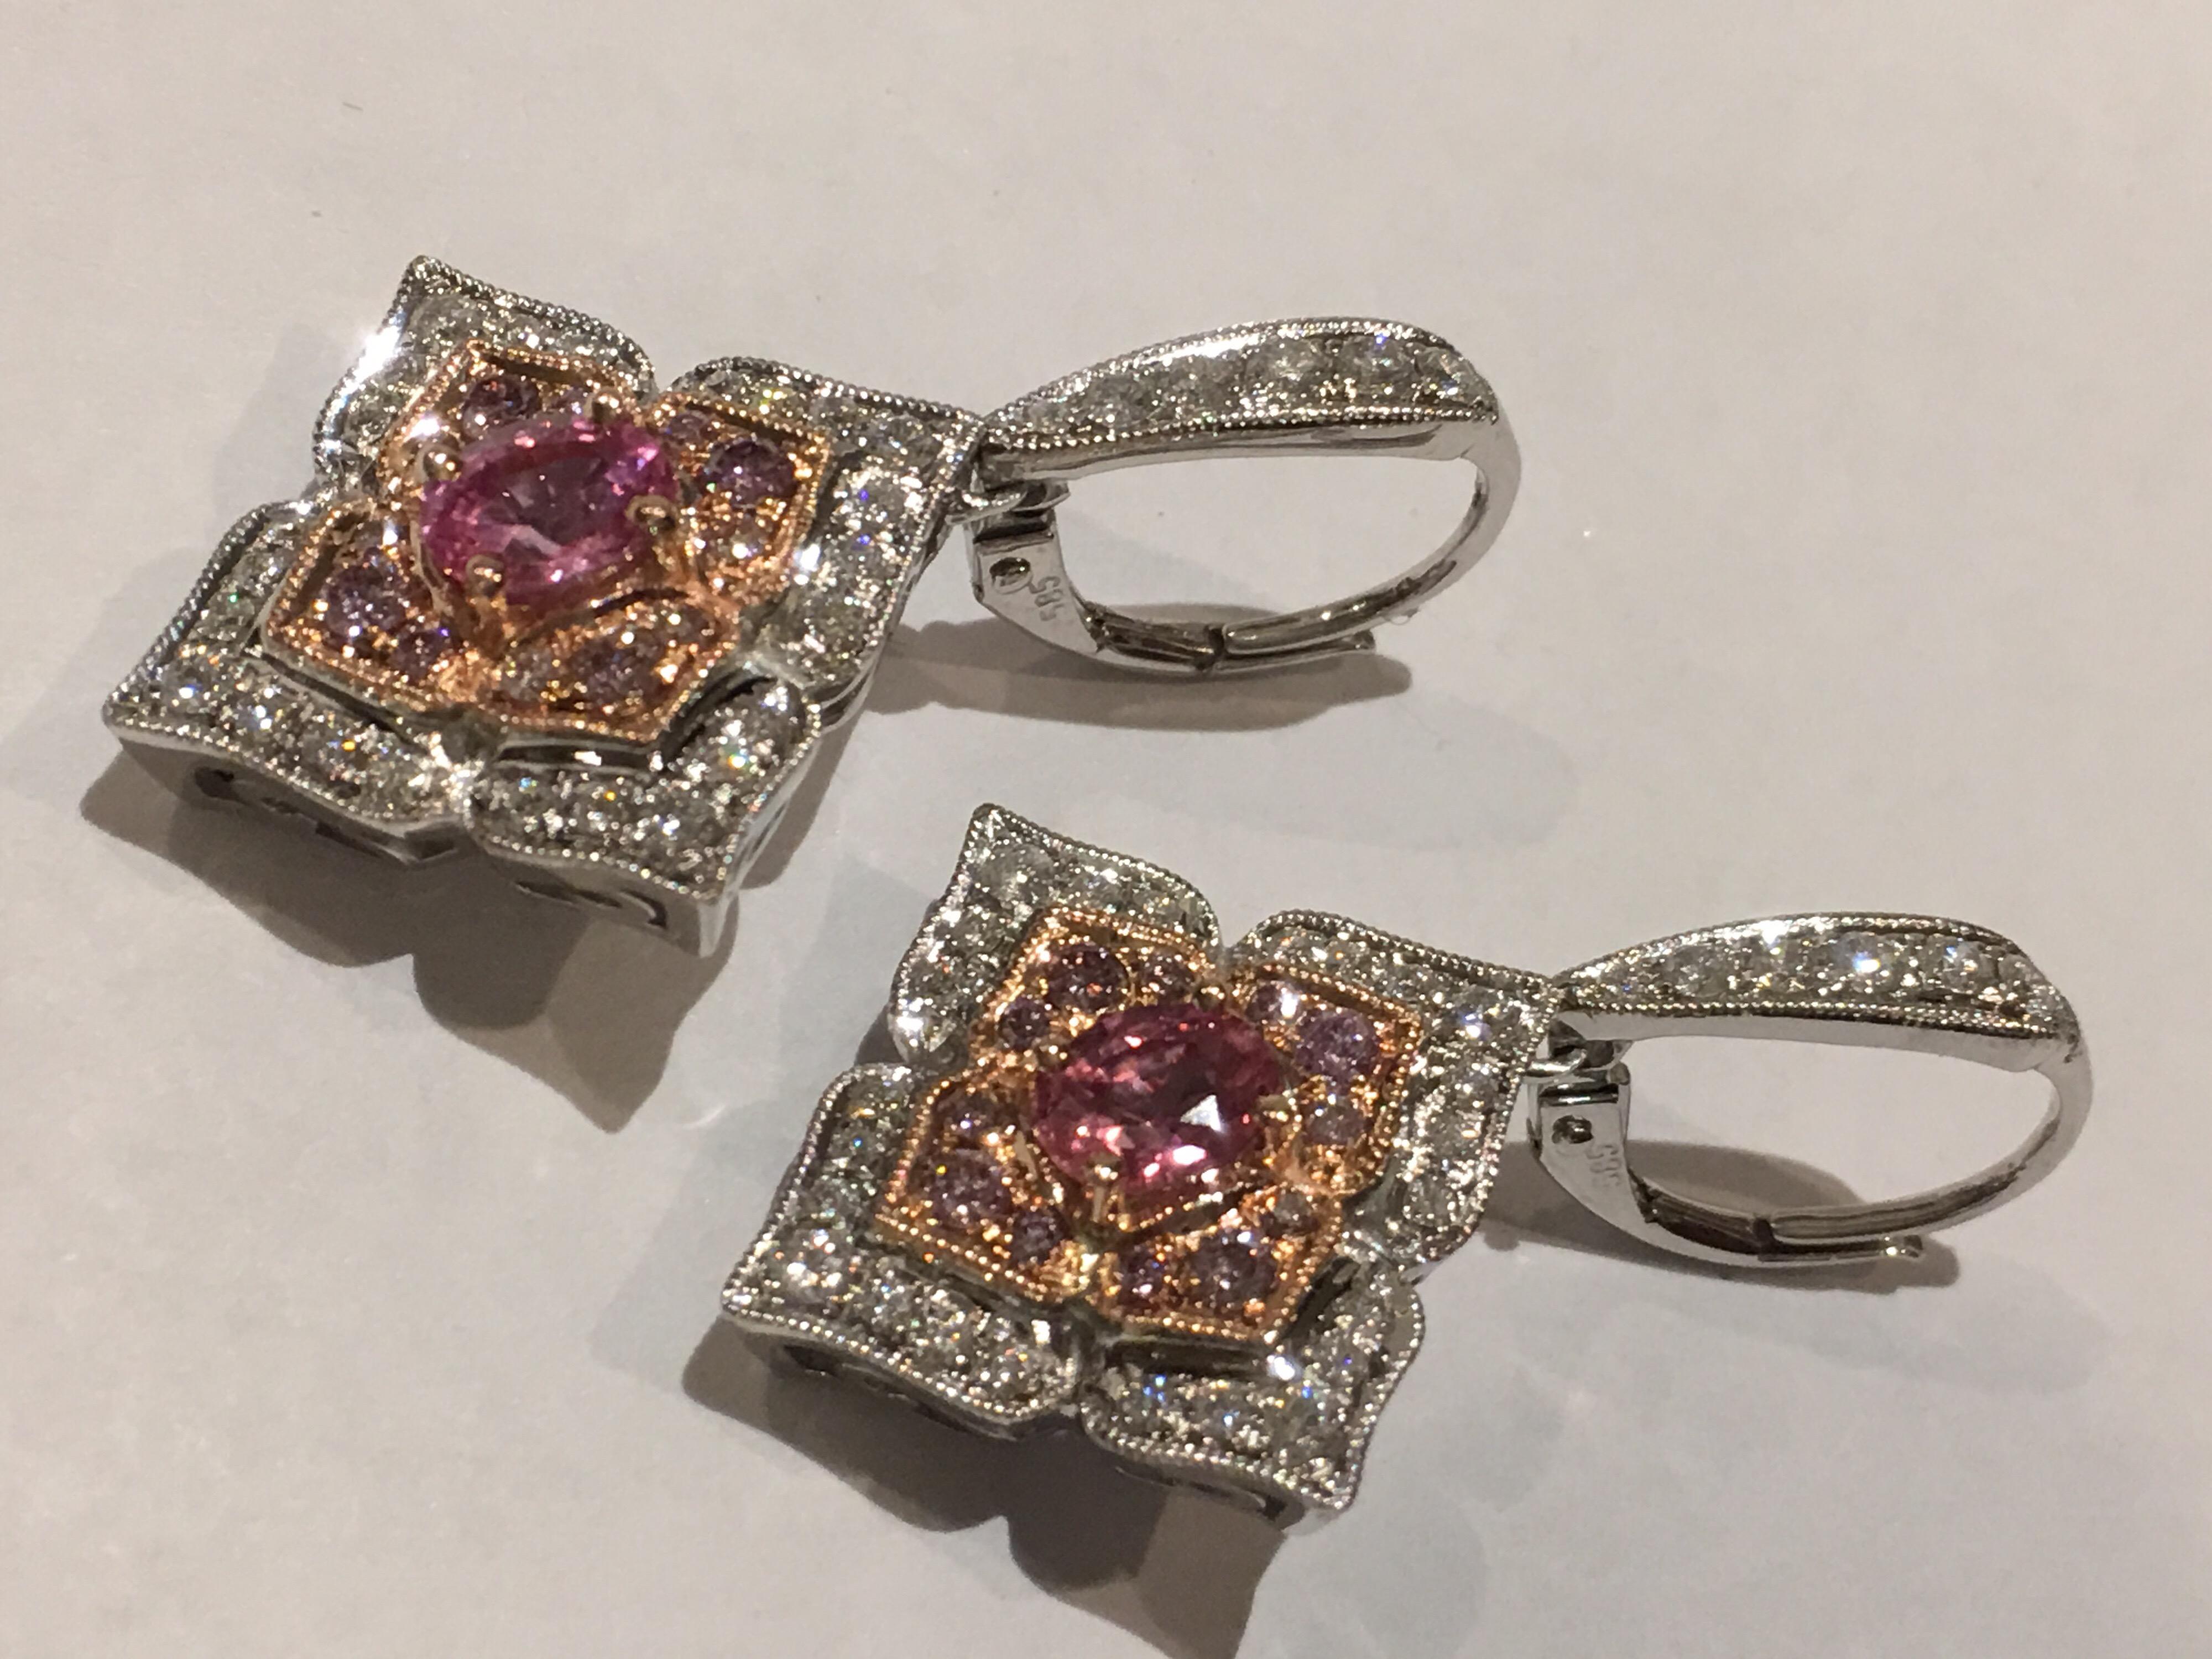 Padparadscha Sapphire Pink and White Diamonds Earrings Set in 14 Karat Gold 1